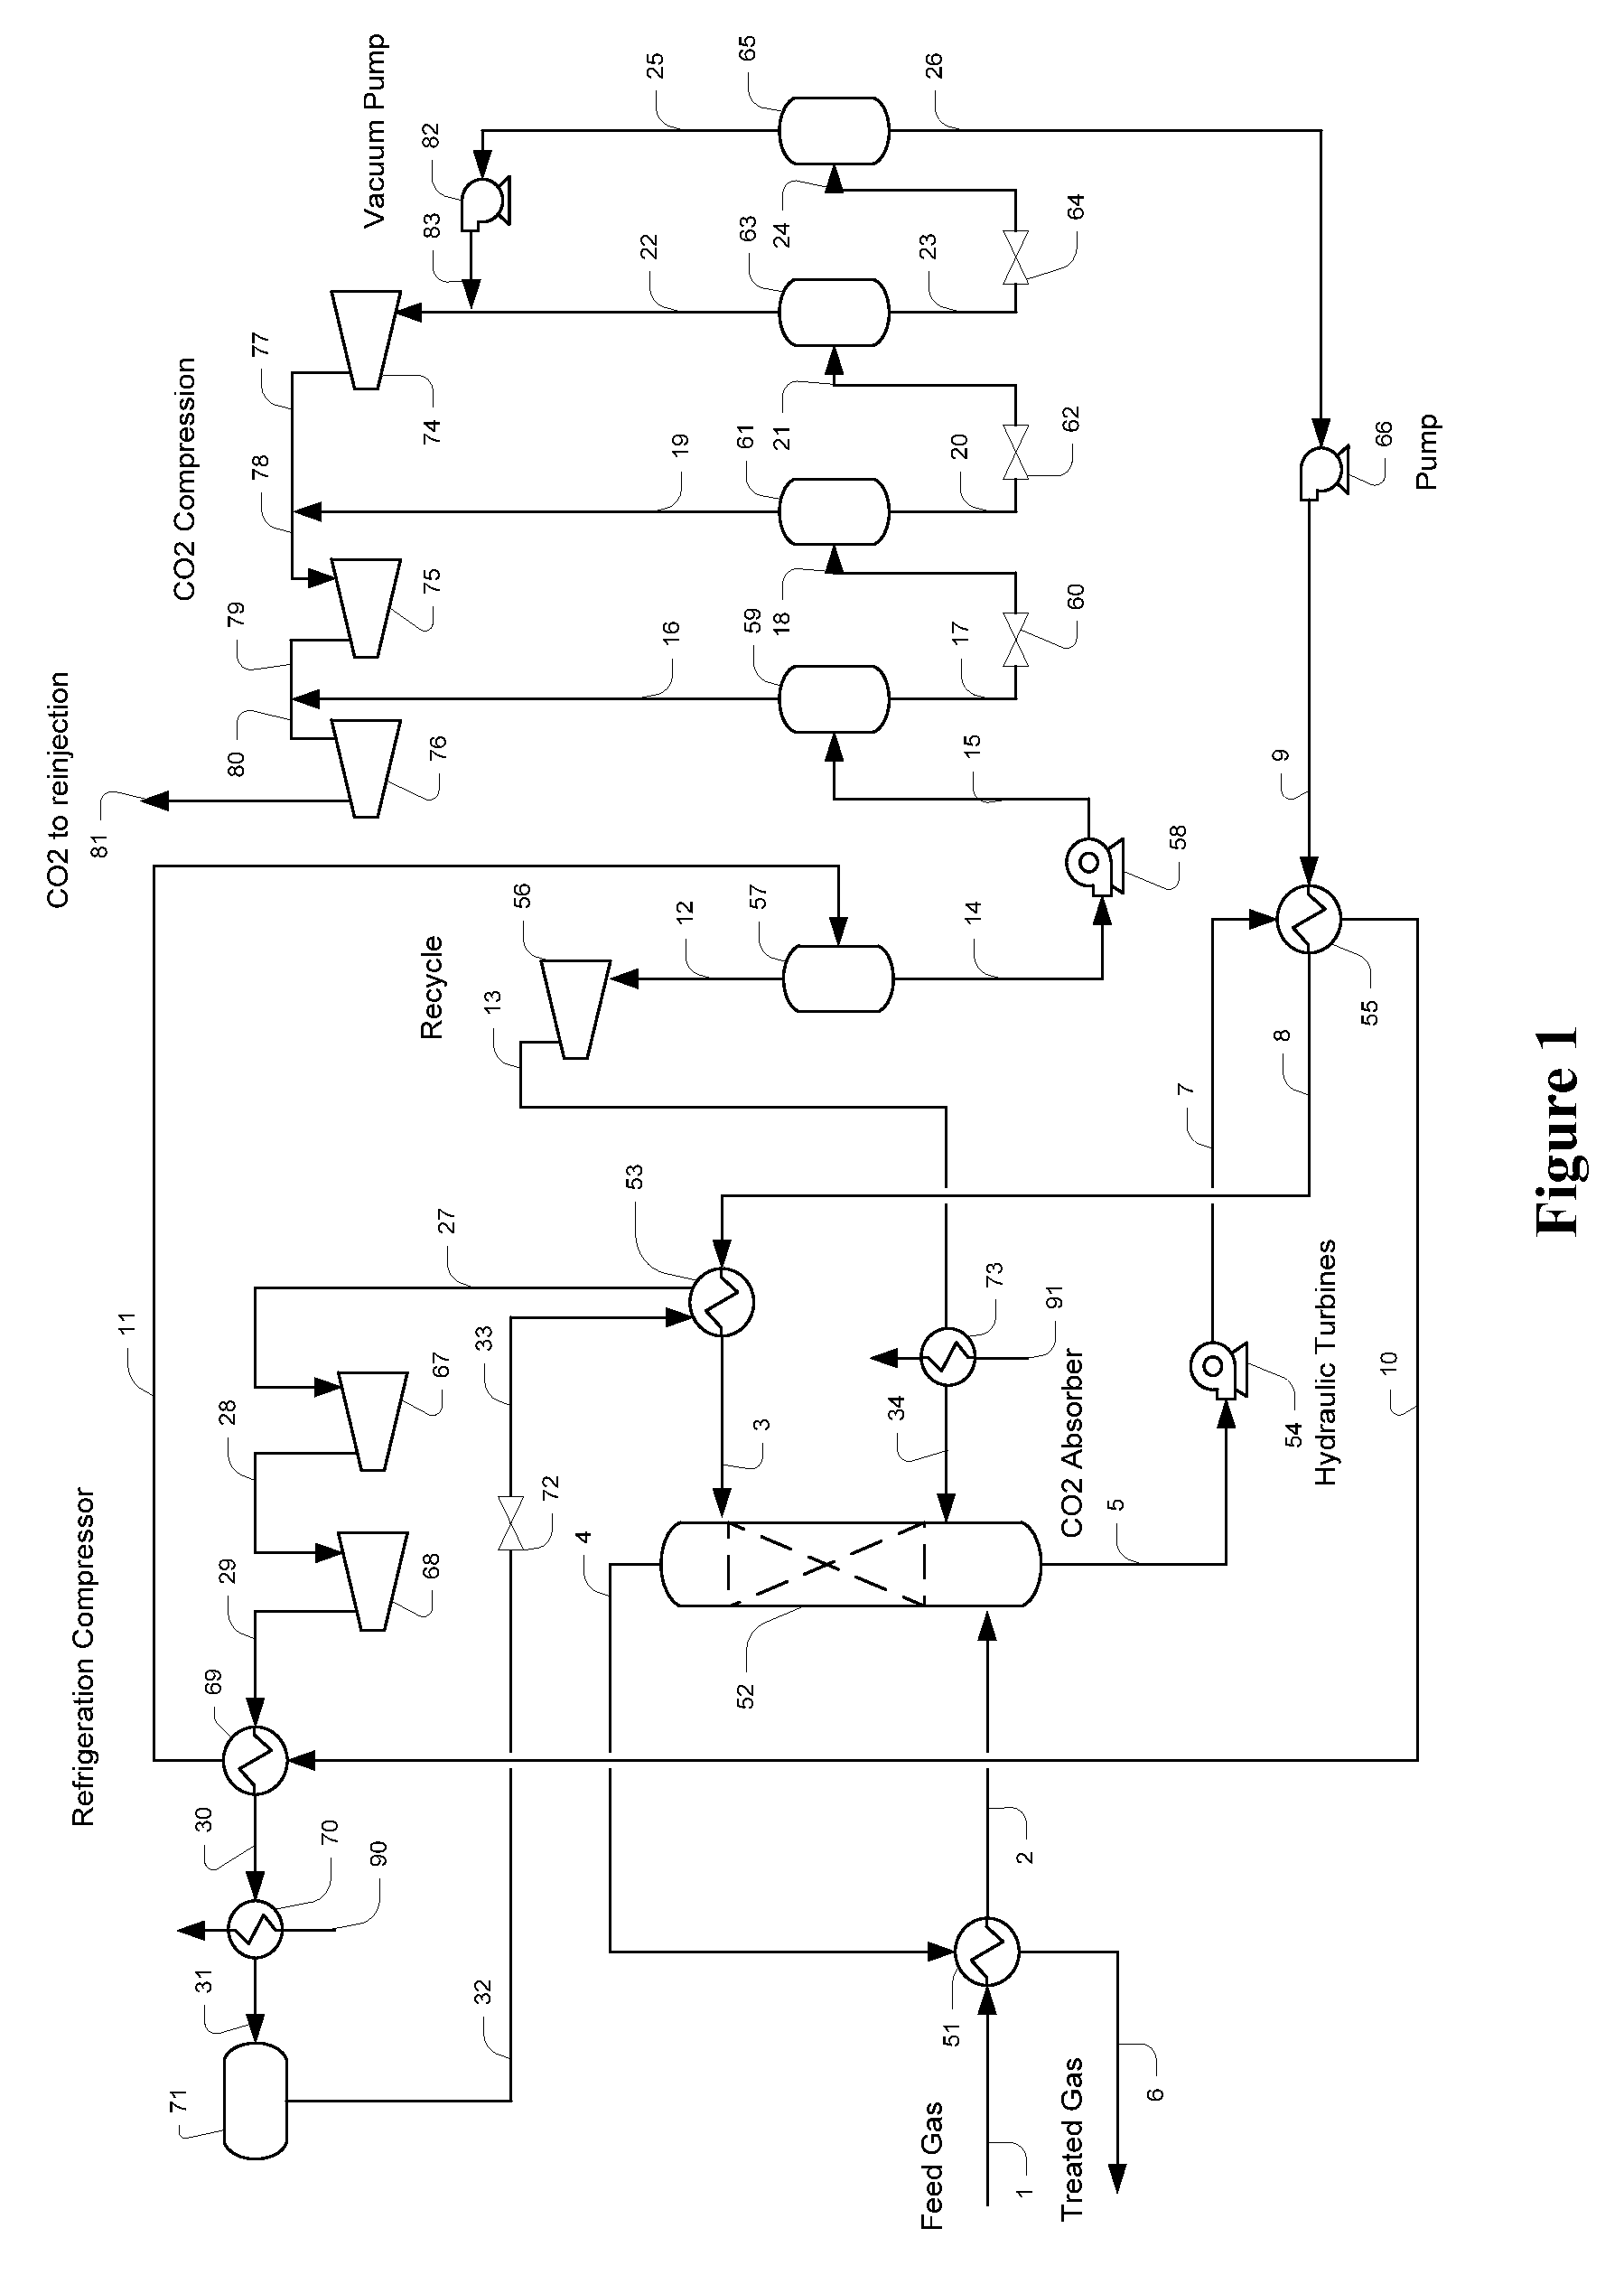 Configurations and methods of high pressure acid gas removal